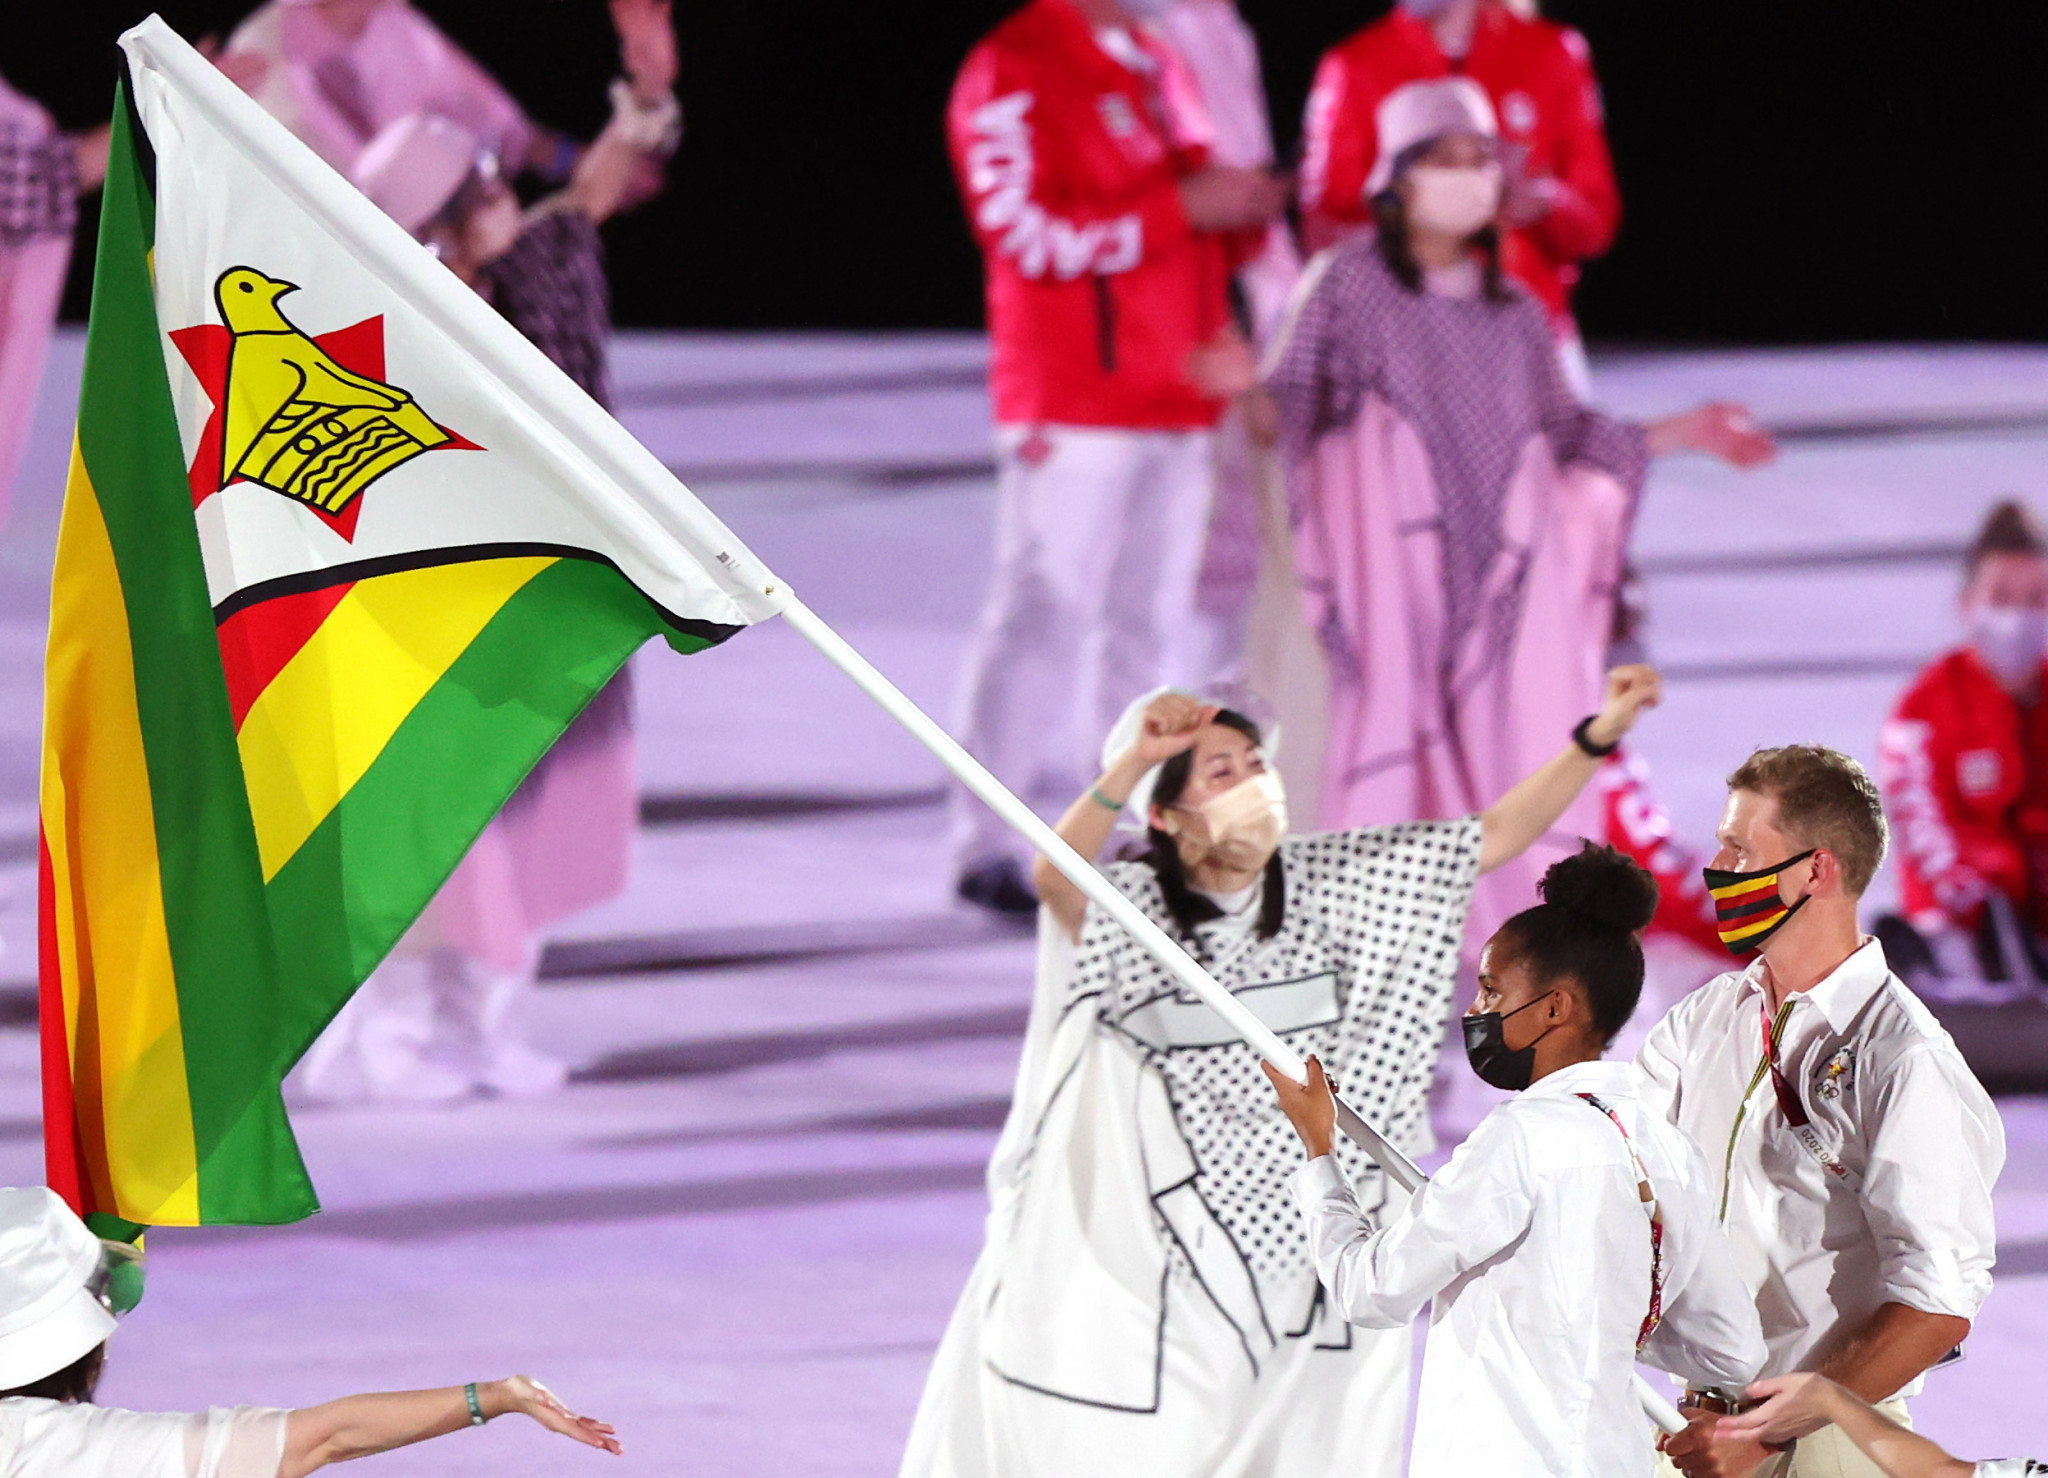 Zimbabwe Olympic Committee chief executive identifies raising awareness of Olympics as key part of new role